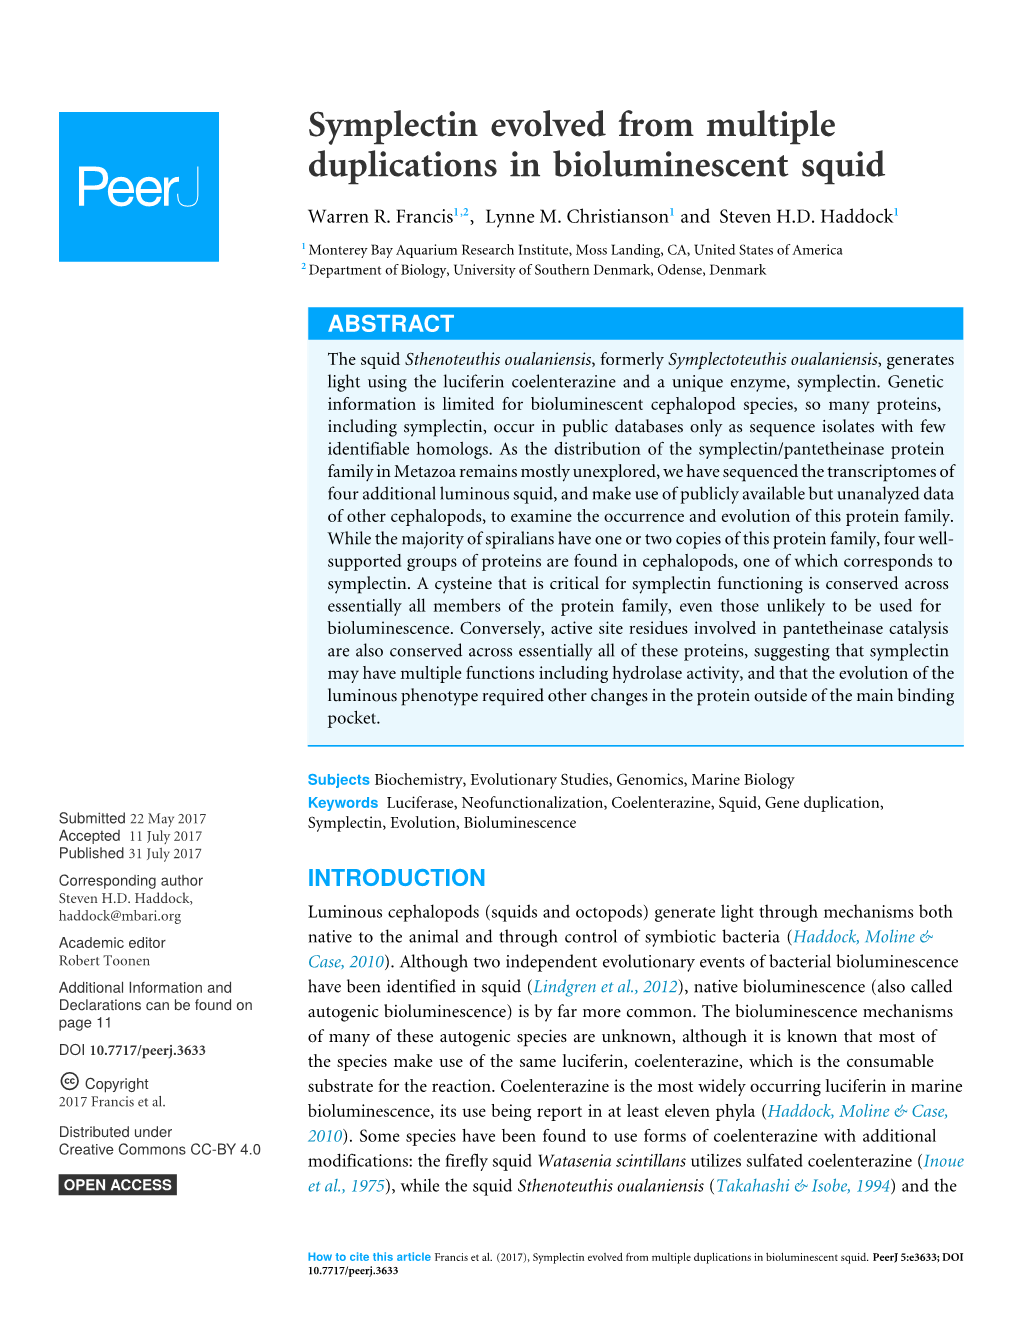 Symplectin Evolved from Multiple Duplications in Bioluminescent Squid